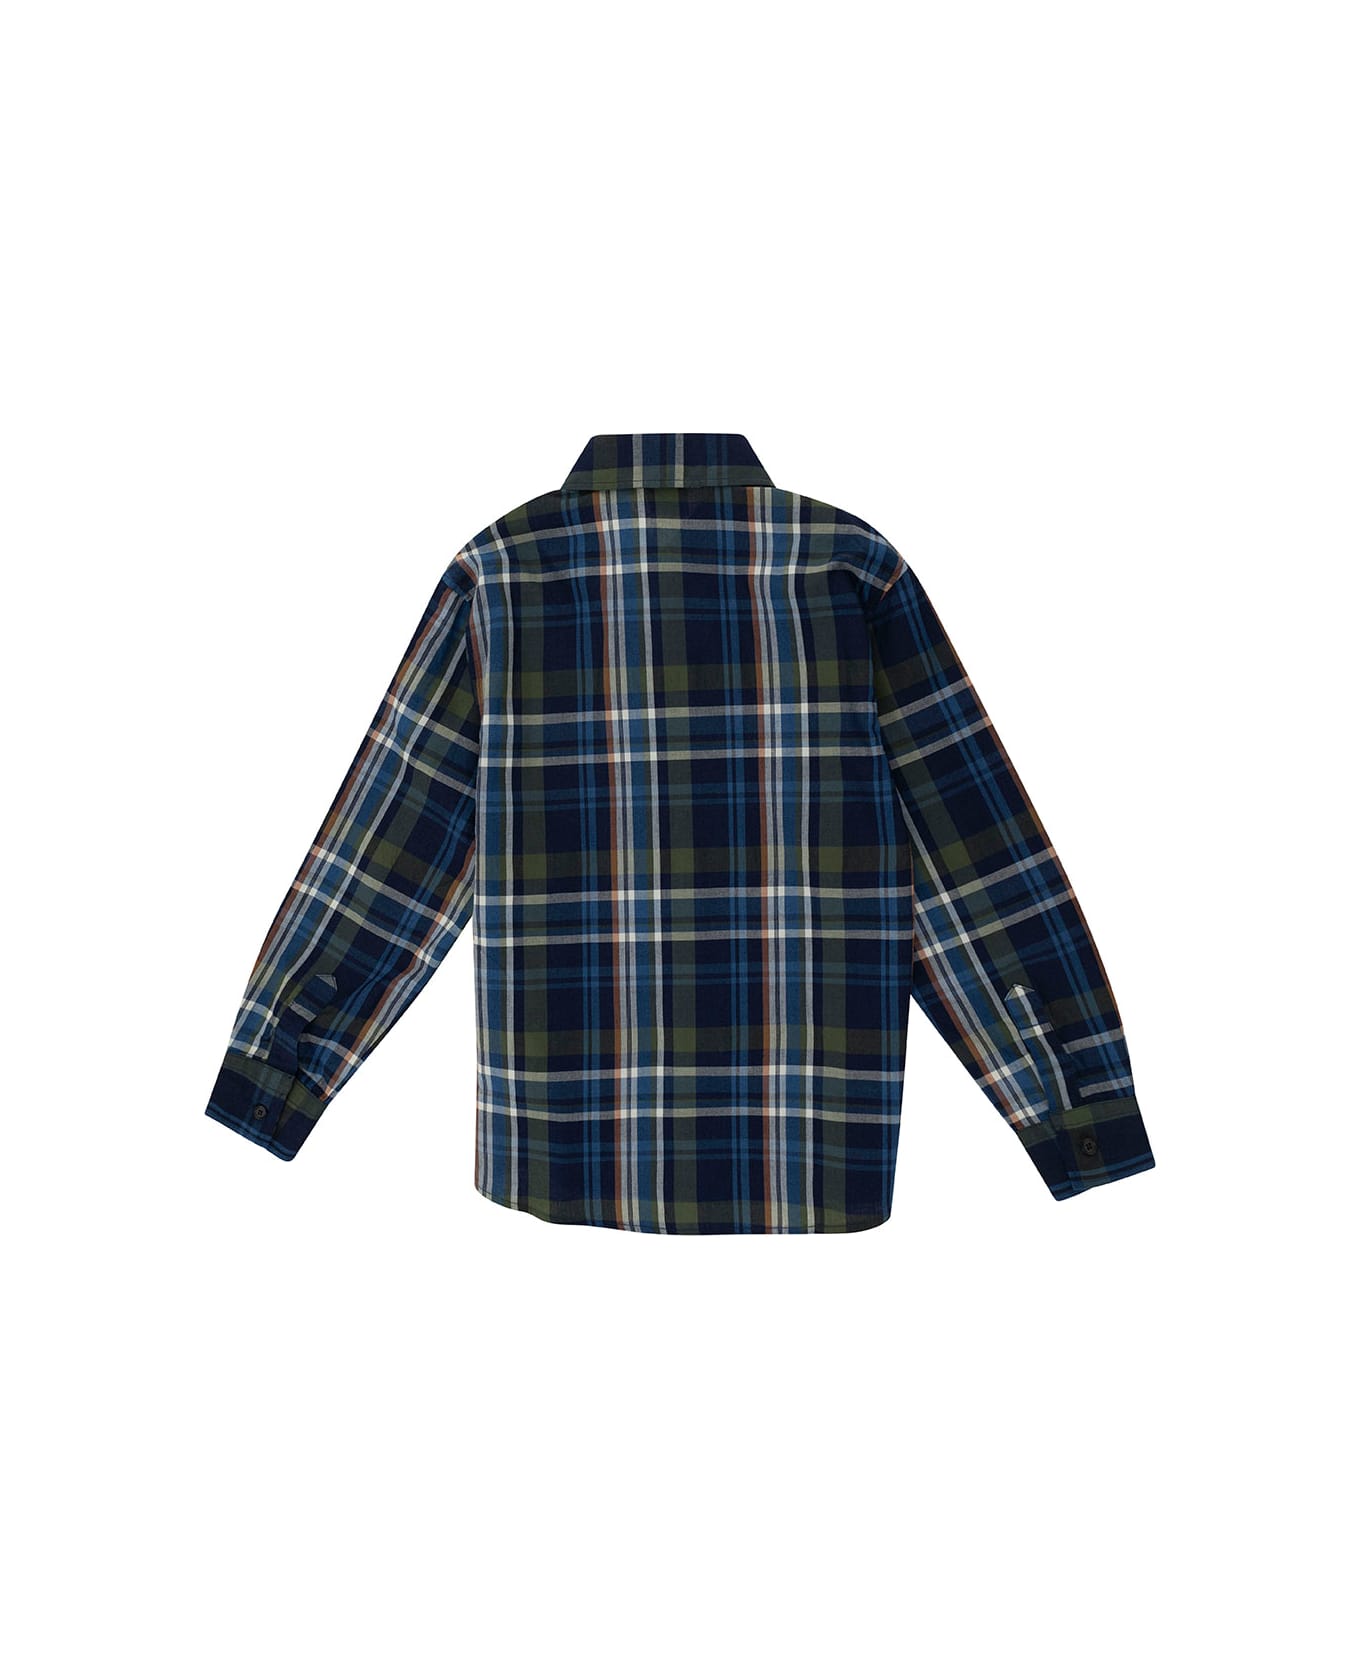 Aspesi Blue And Green Shirt With Check Motif In Cotton Boy - Blu シャツ